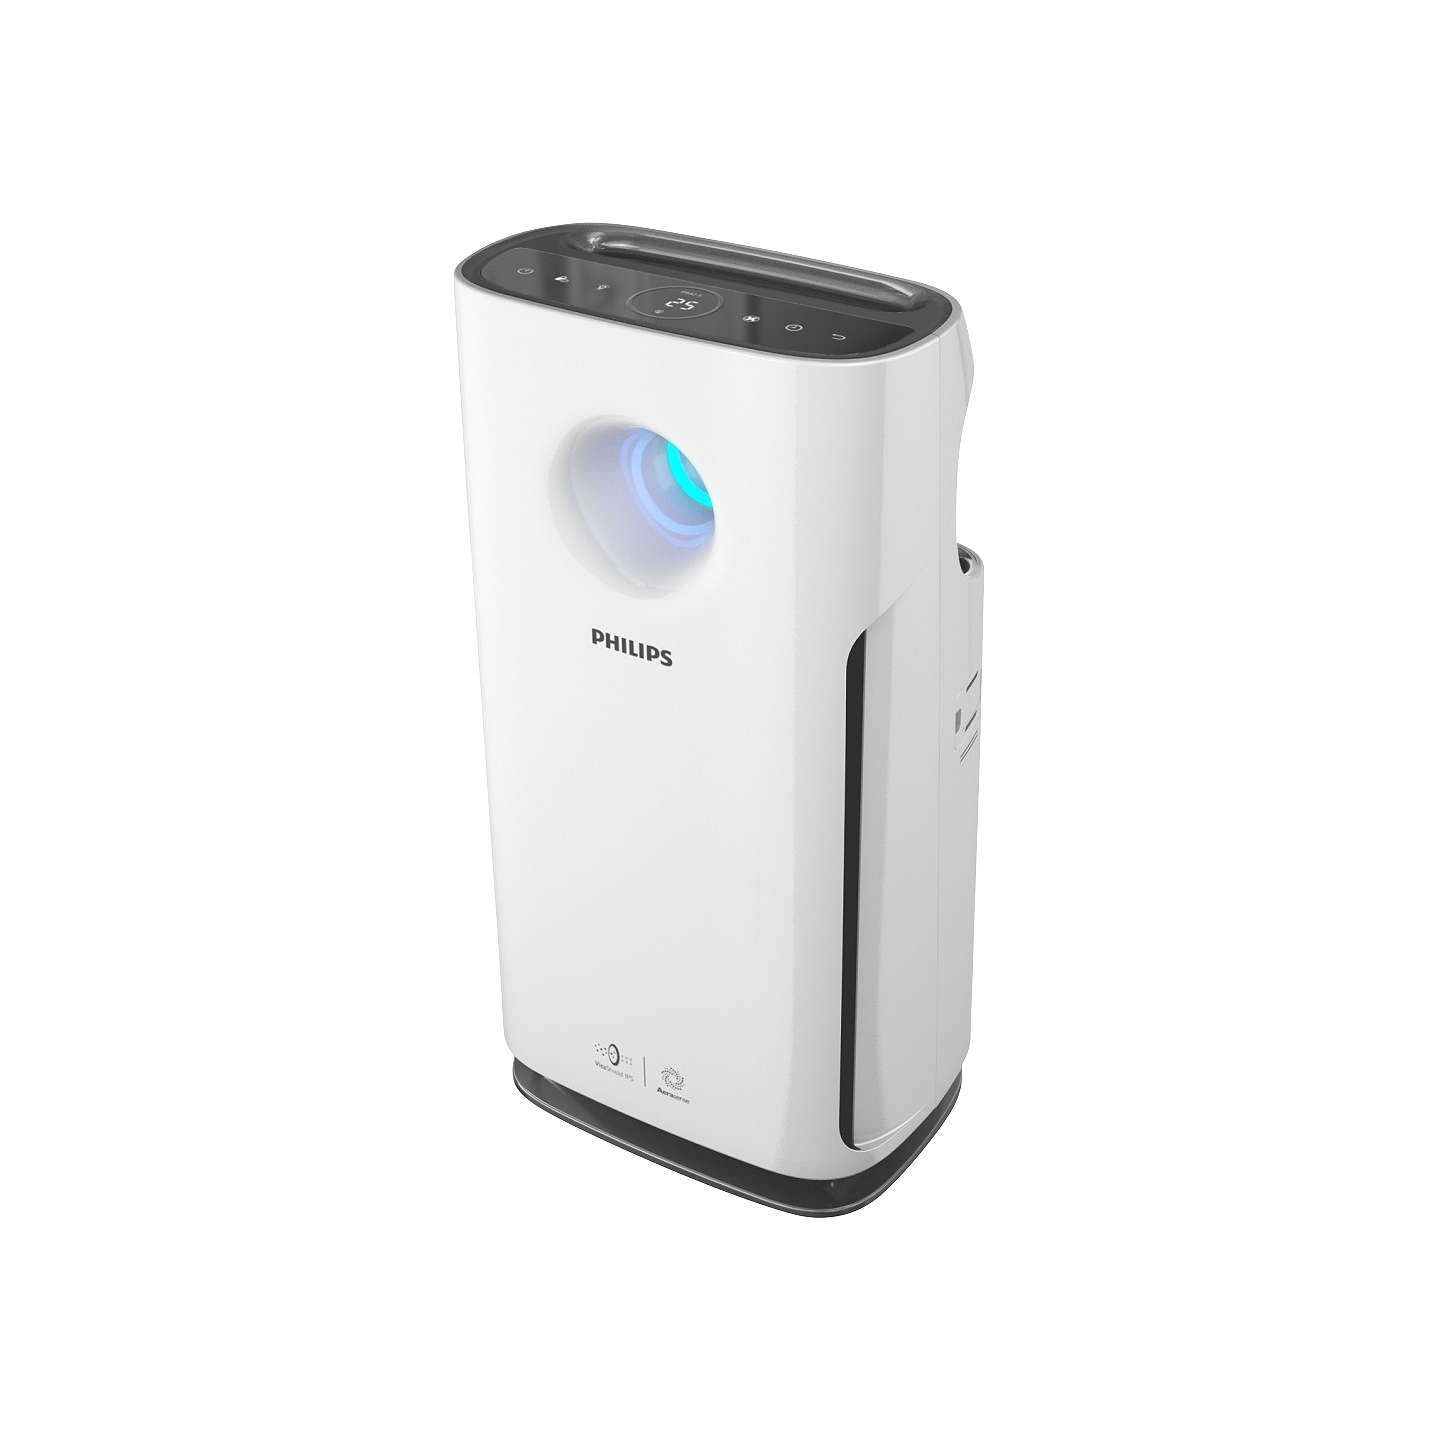 buyphilips ac3256 60 anti allergen and nanoprotect filter air purifier online at johnlewis